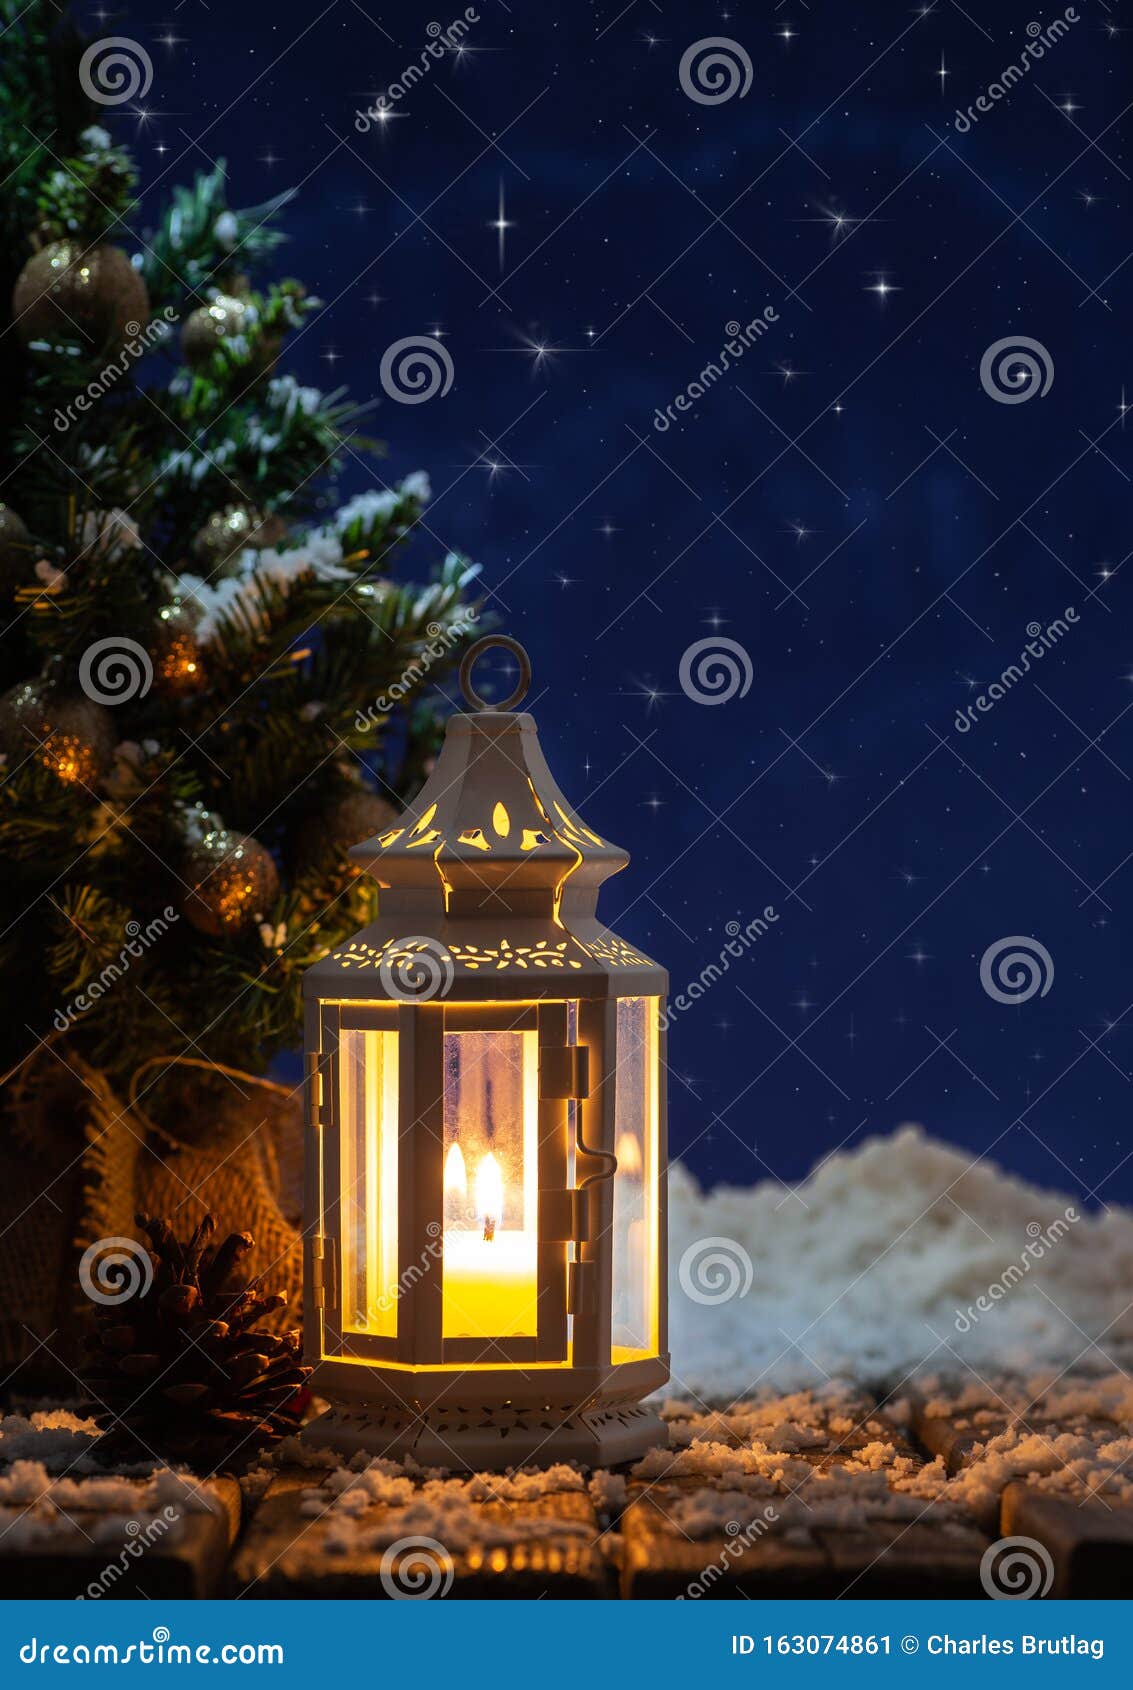 Winter Holiday Scene with Glowing Lantern Stock Image - Image of ...